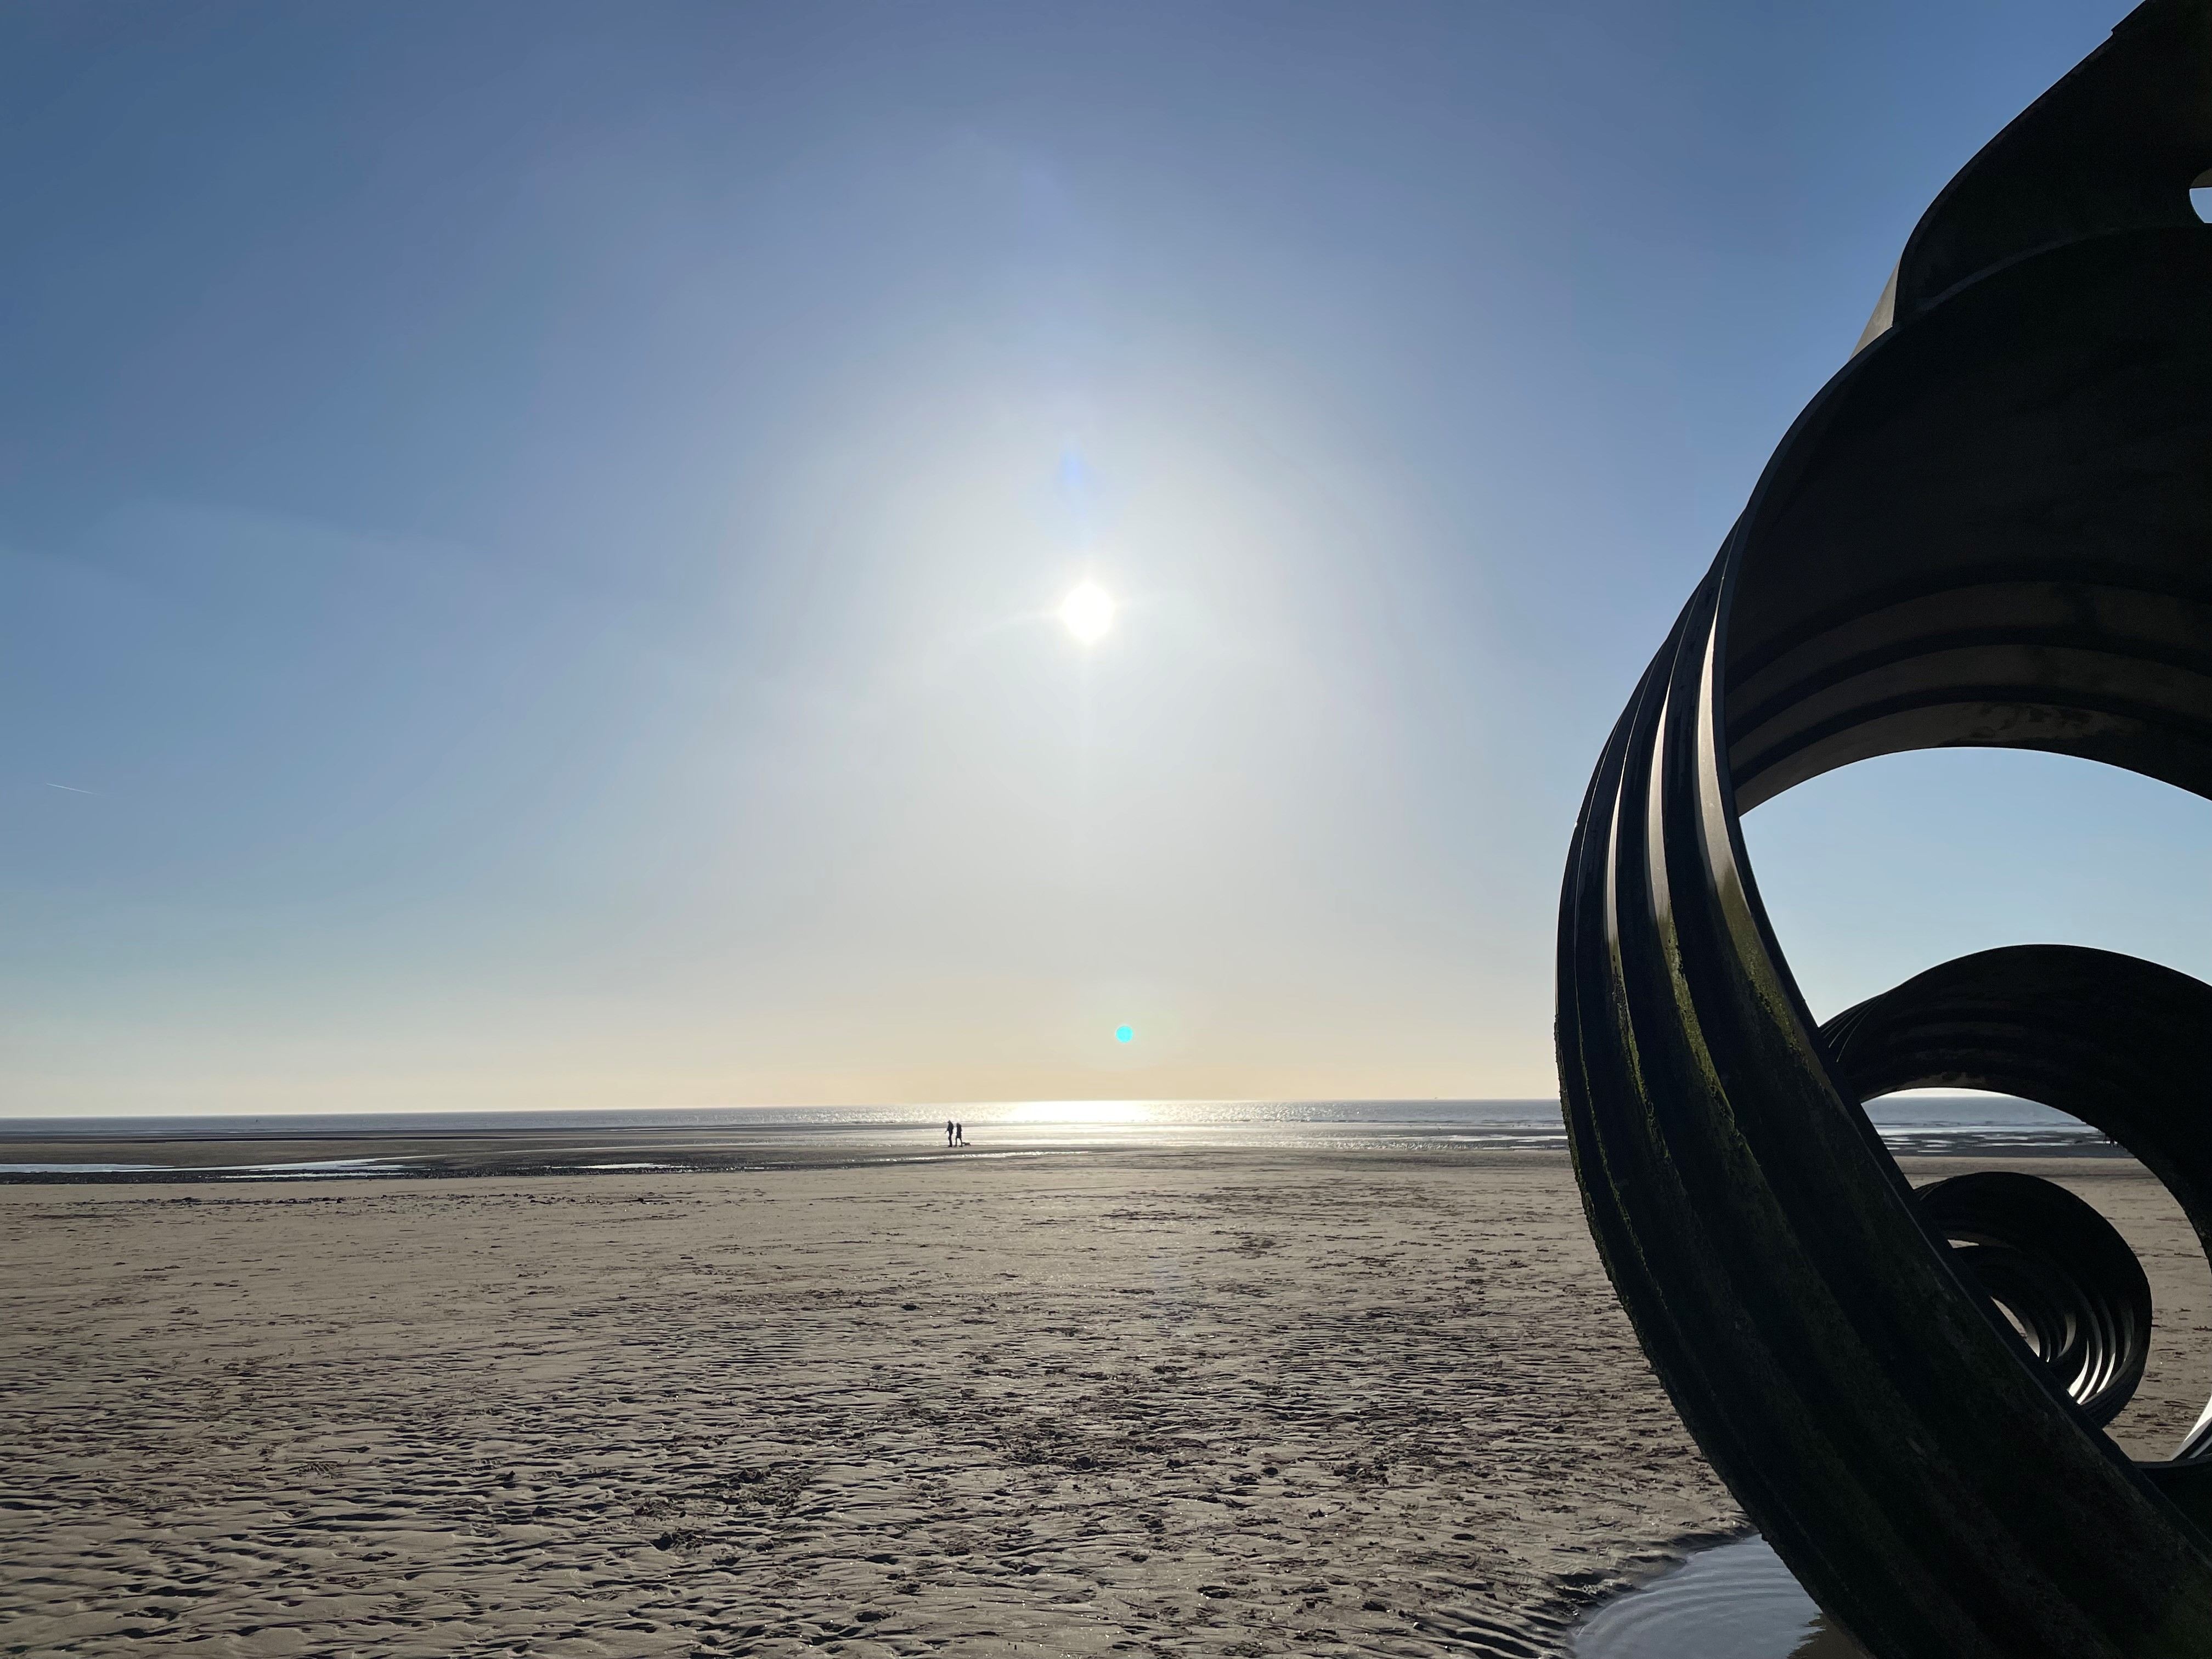 Cleveleys beach showing the sand, the sun setting and Mary&#039;s shell installation